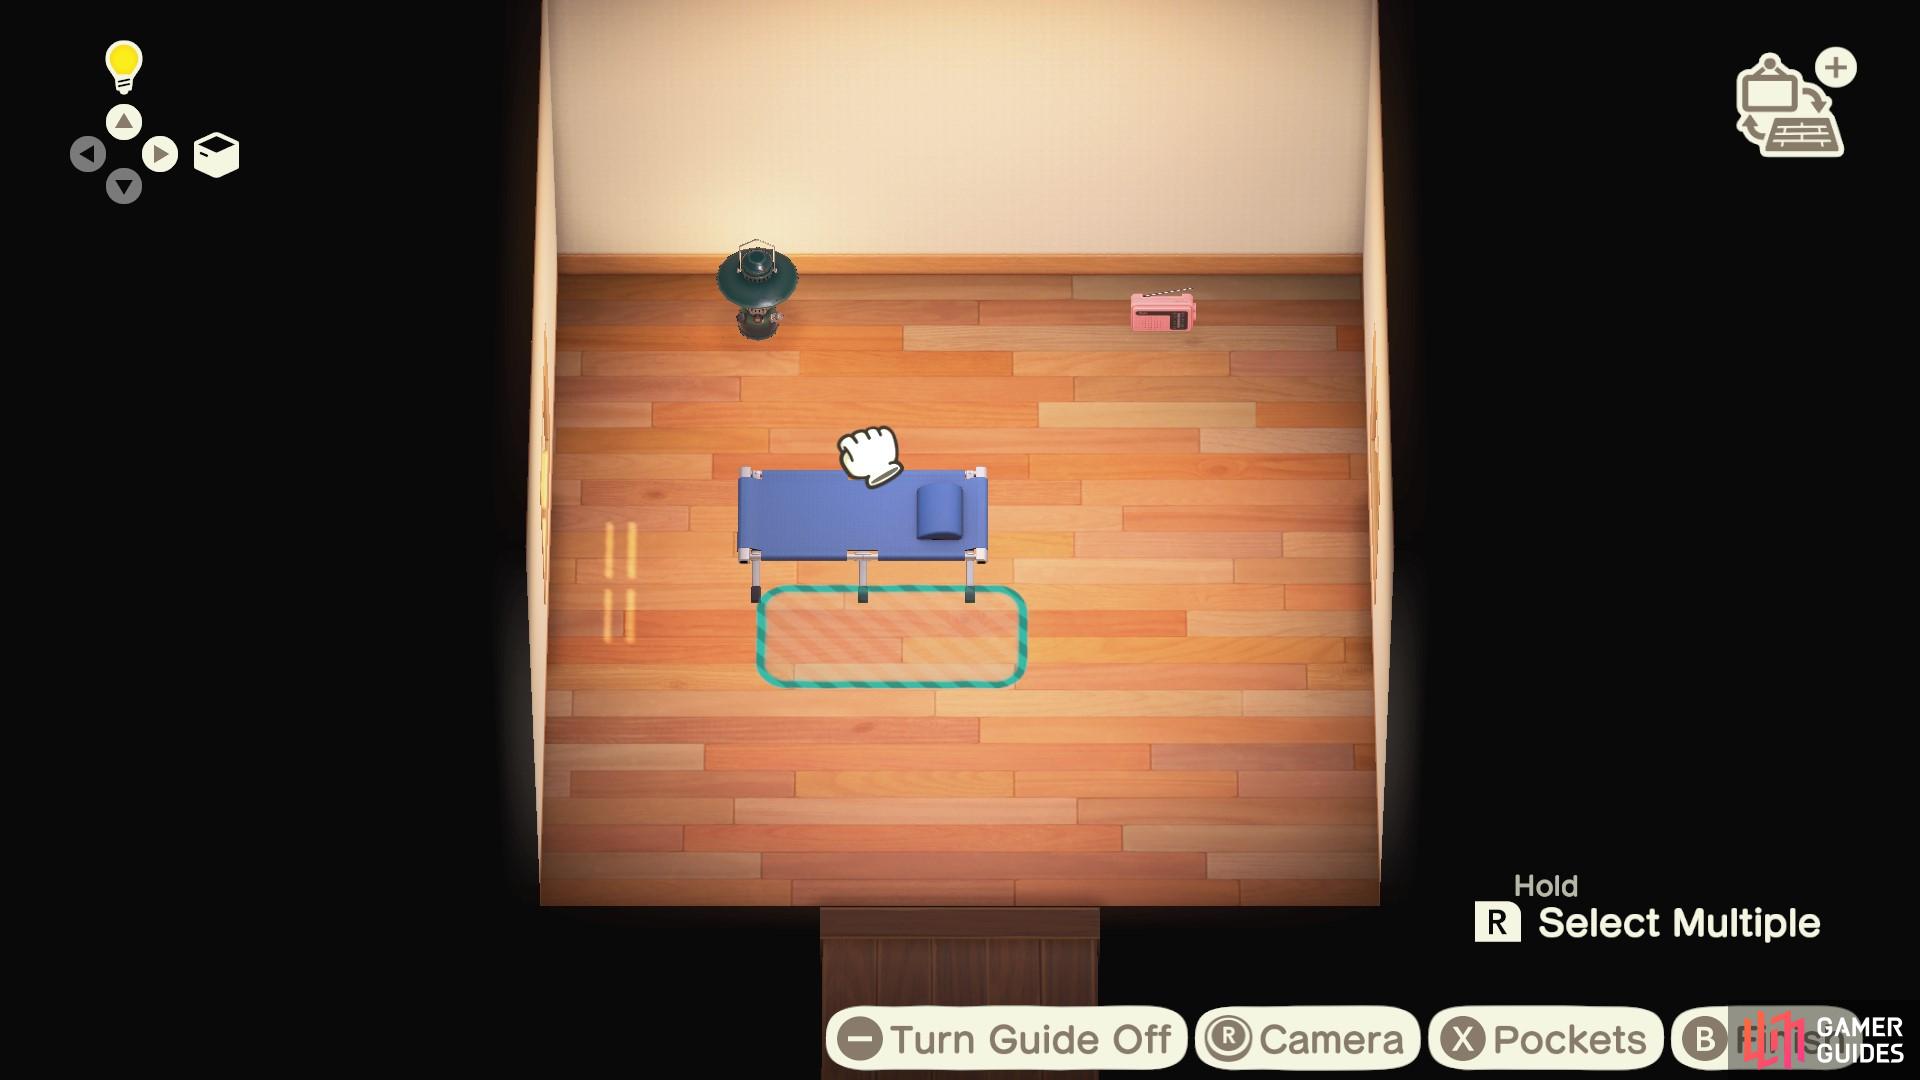 This function allows you to easily move items around your house.